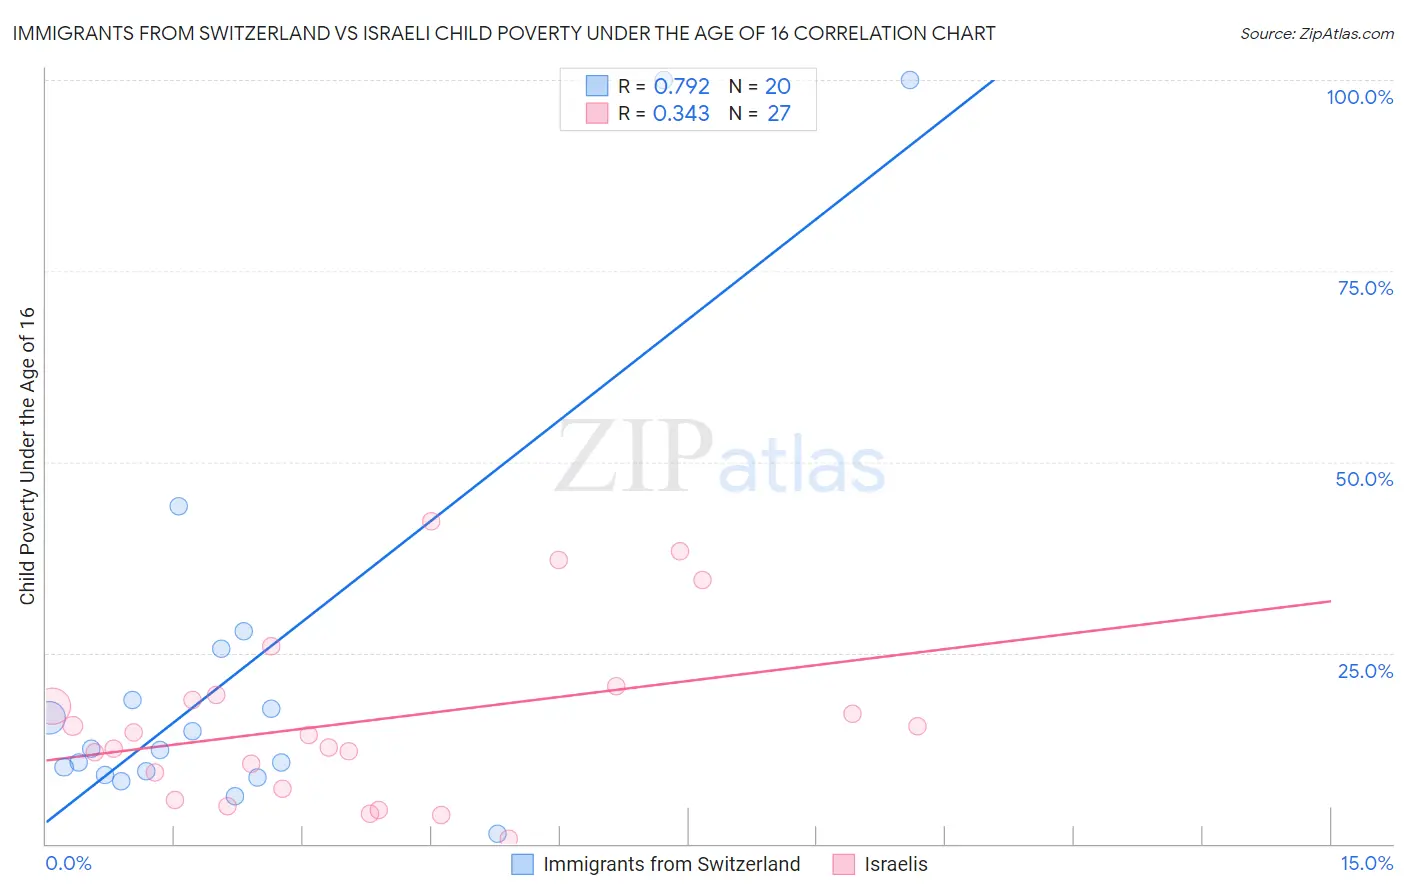 Immigrants from Switzerland vs Israeli Child Poverty Under the Age of 16